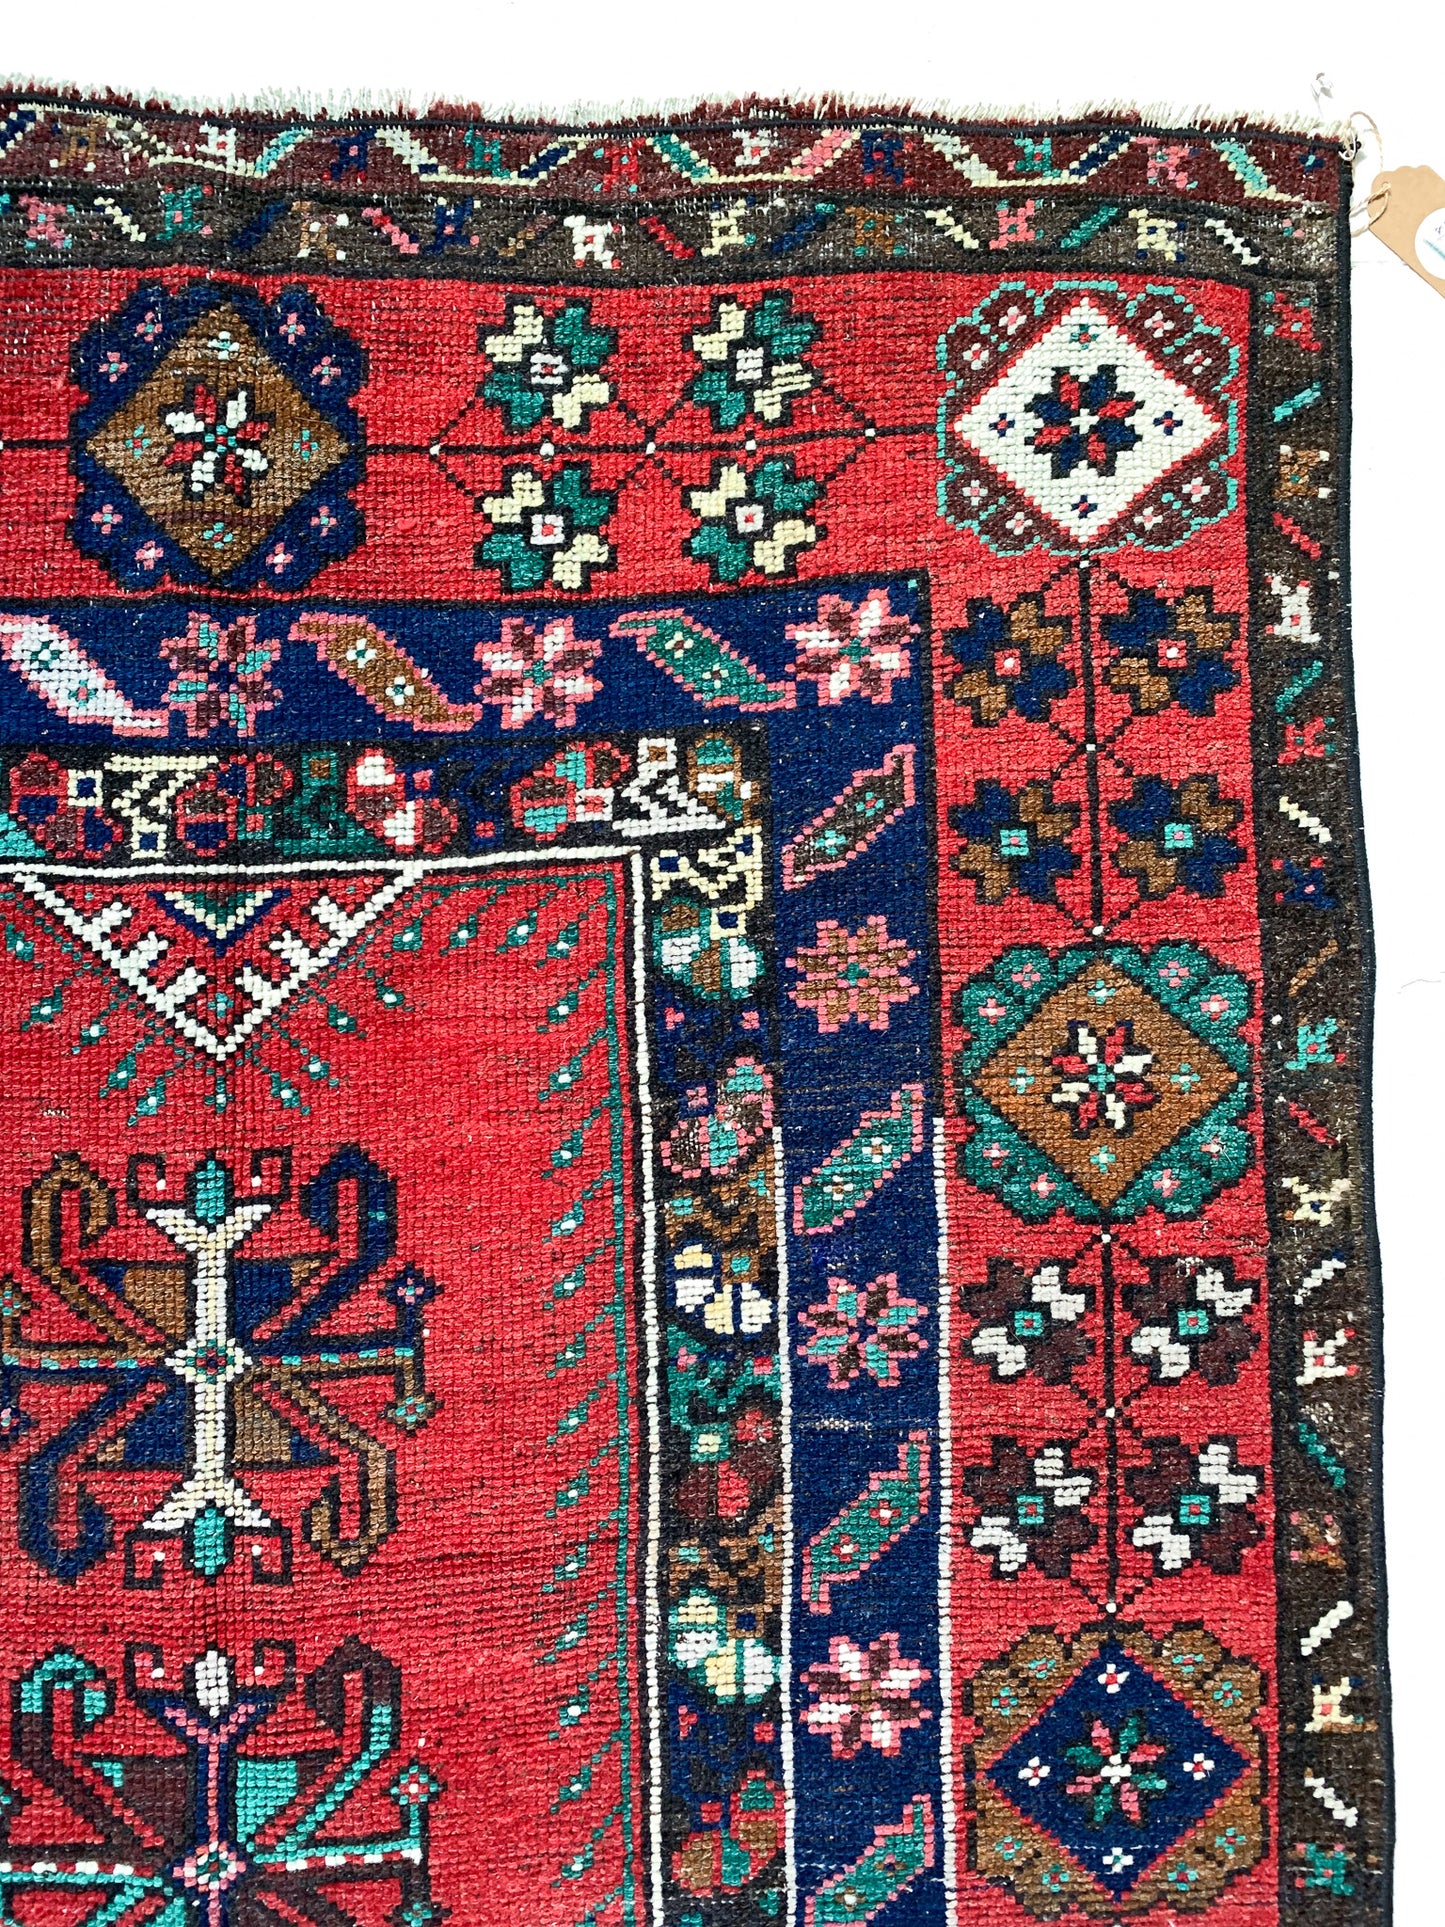 Reserved for Lynda - No. A1011 - 3.8' x 5.9' Vintage Turkish Anatolian Area Rug